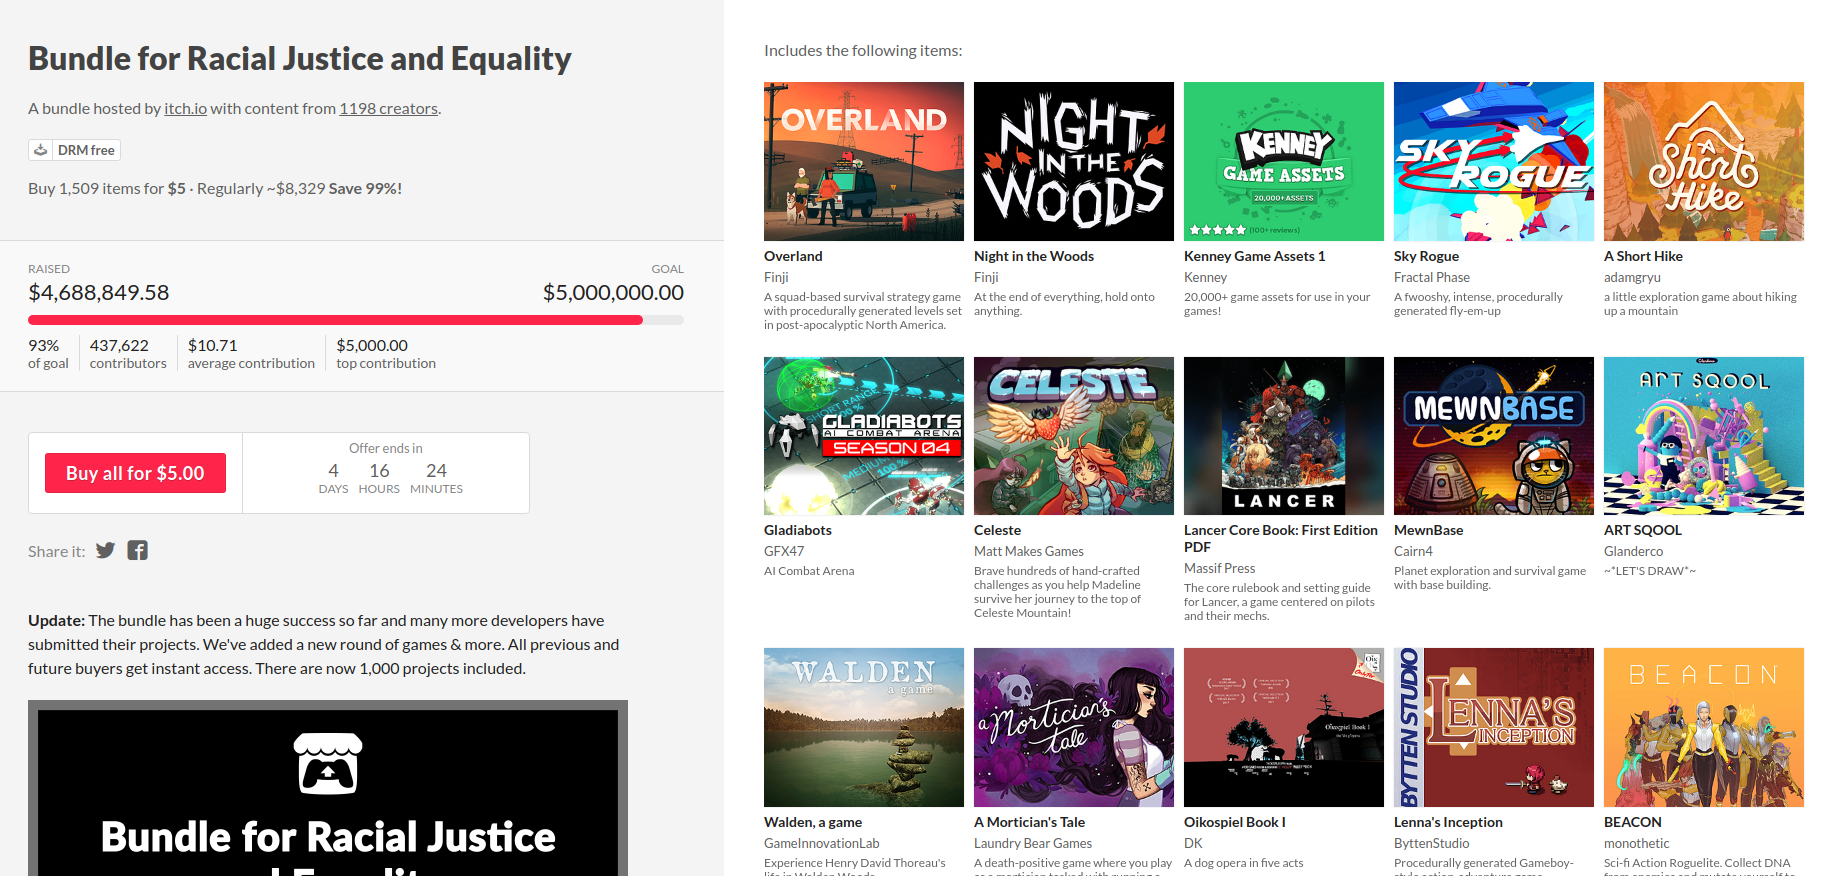 Itch.io Bundle for Racial Justice and Equality ends with a